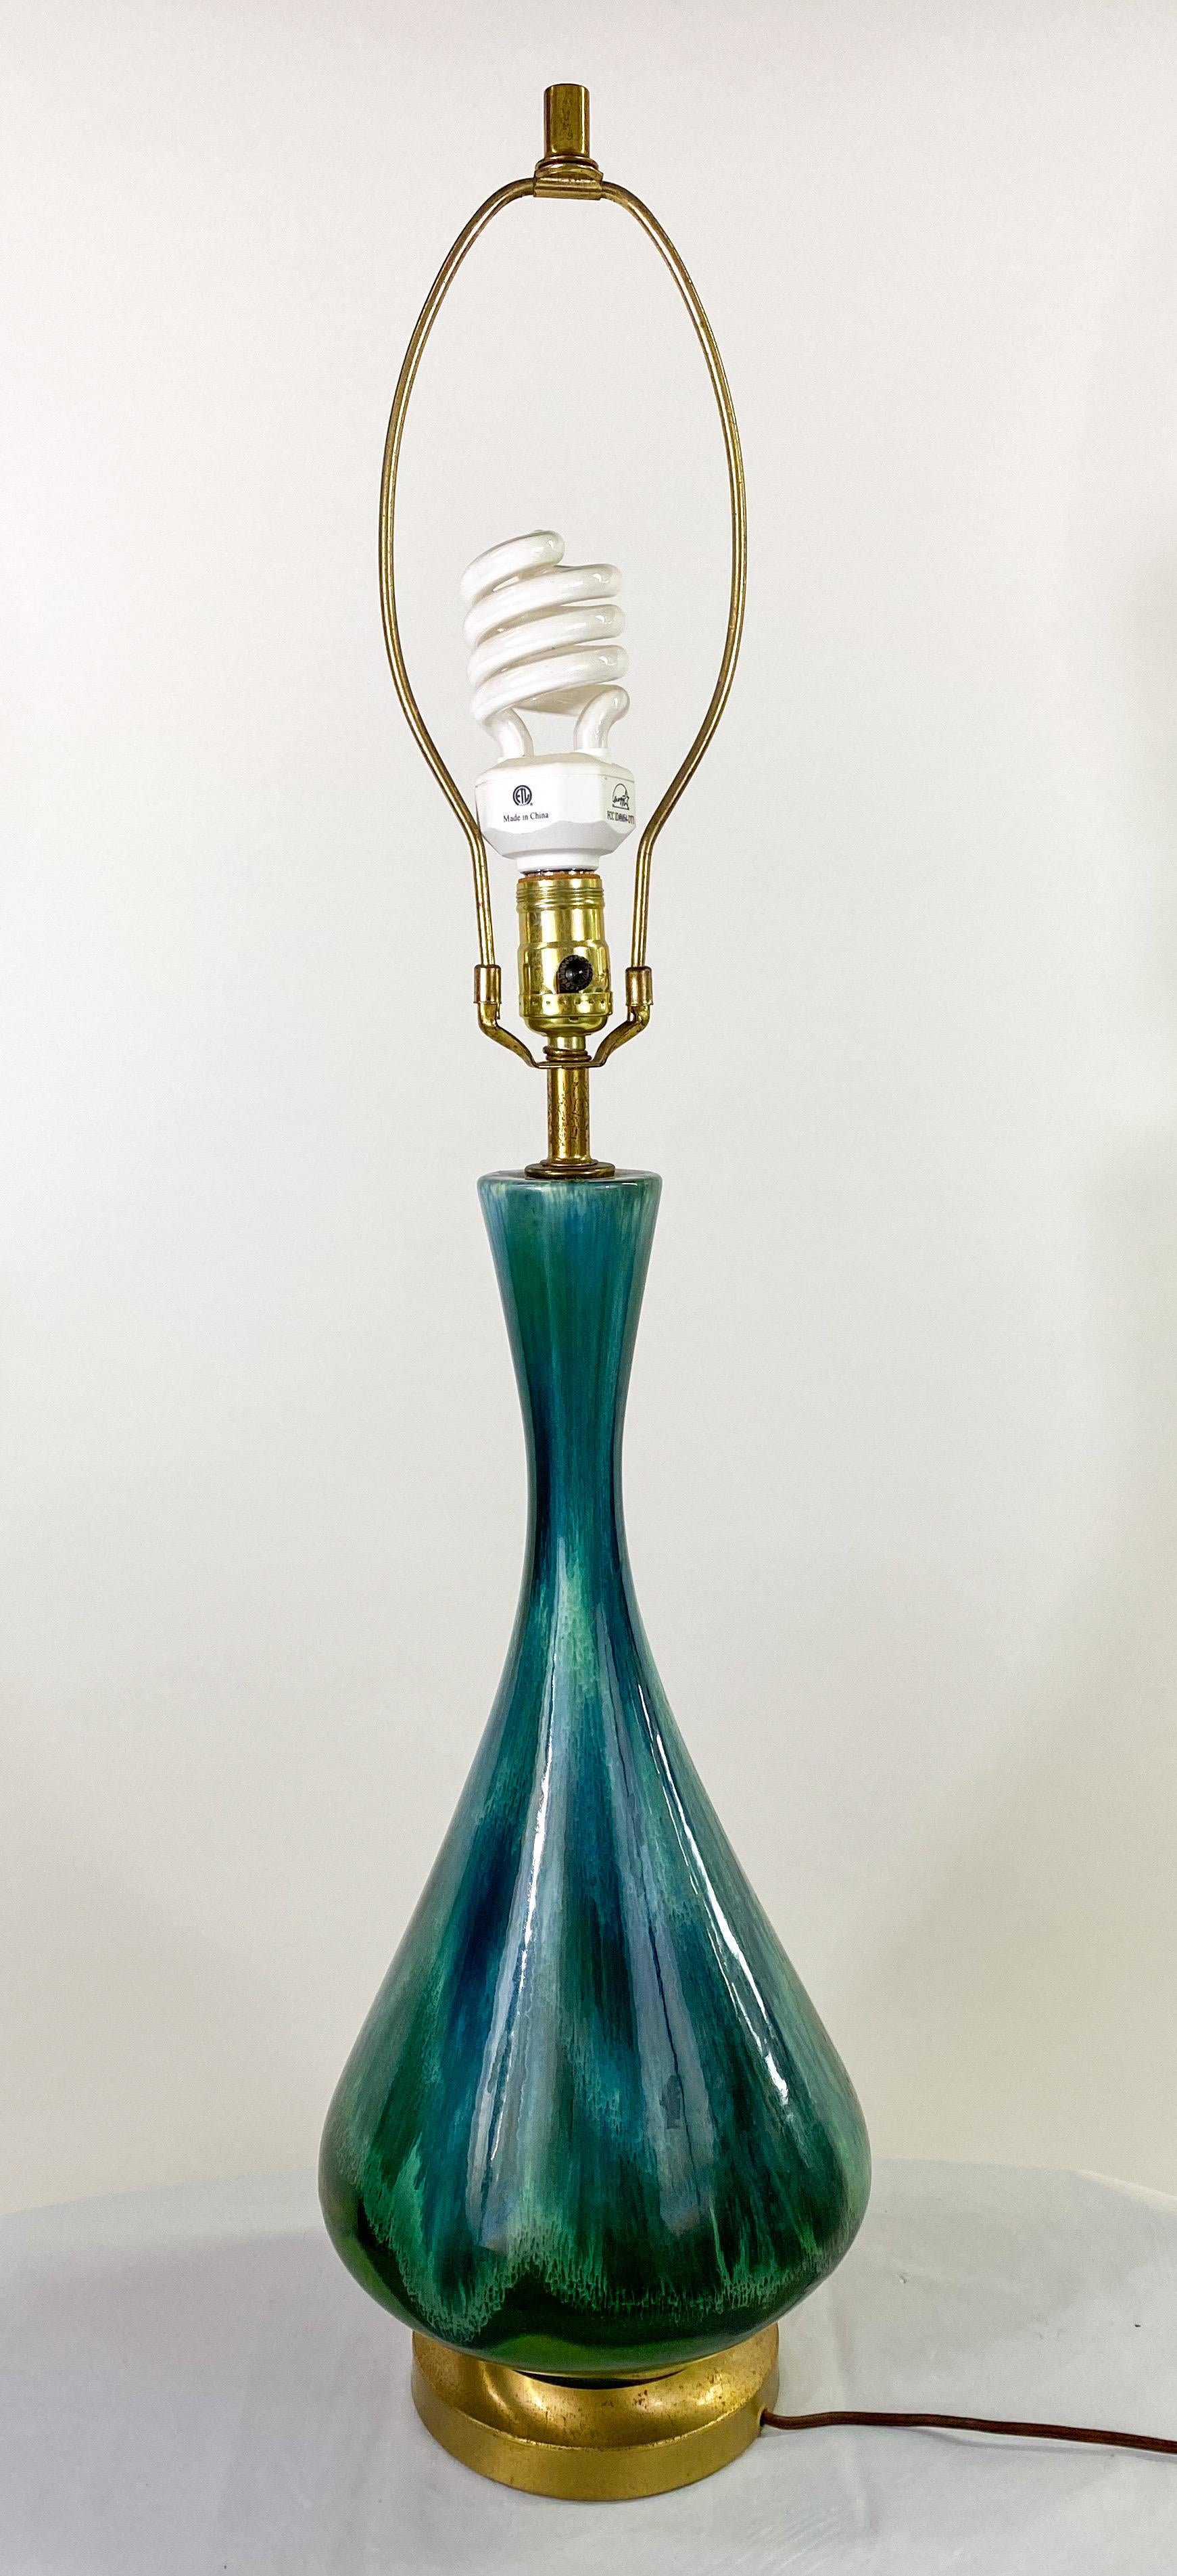 An exquisite Mid-Century Modern table lamp with oversized off-white custom cylindric shaped original shade. The lamp features a malachite inspired green color showing patterns and grains in the style of the beautiful stone. The lamp is shaped like a